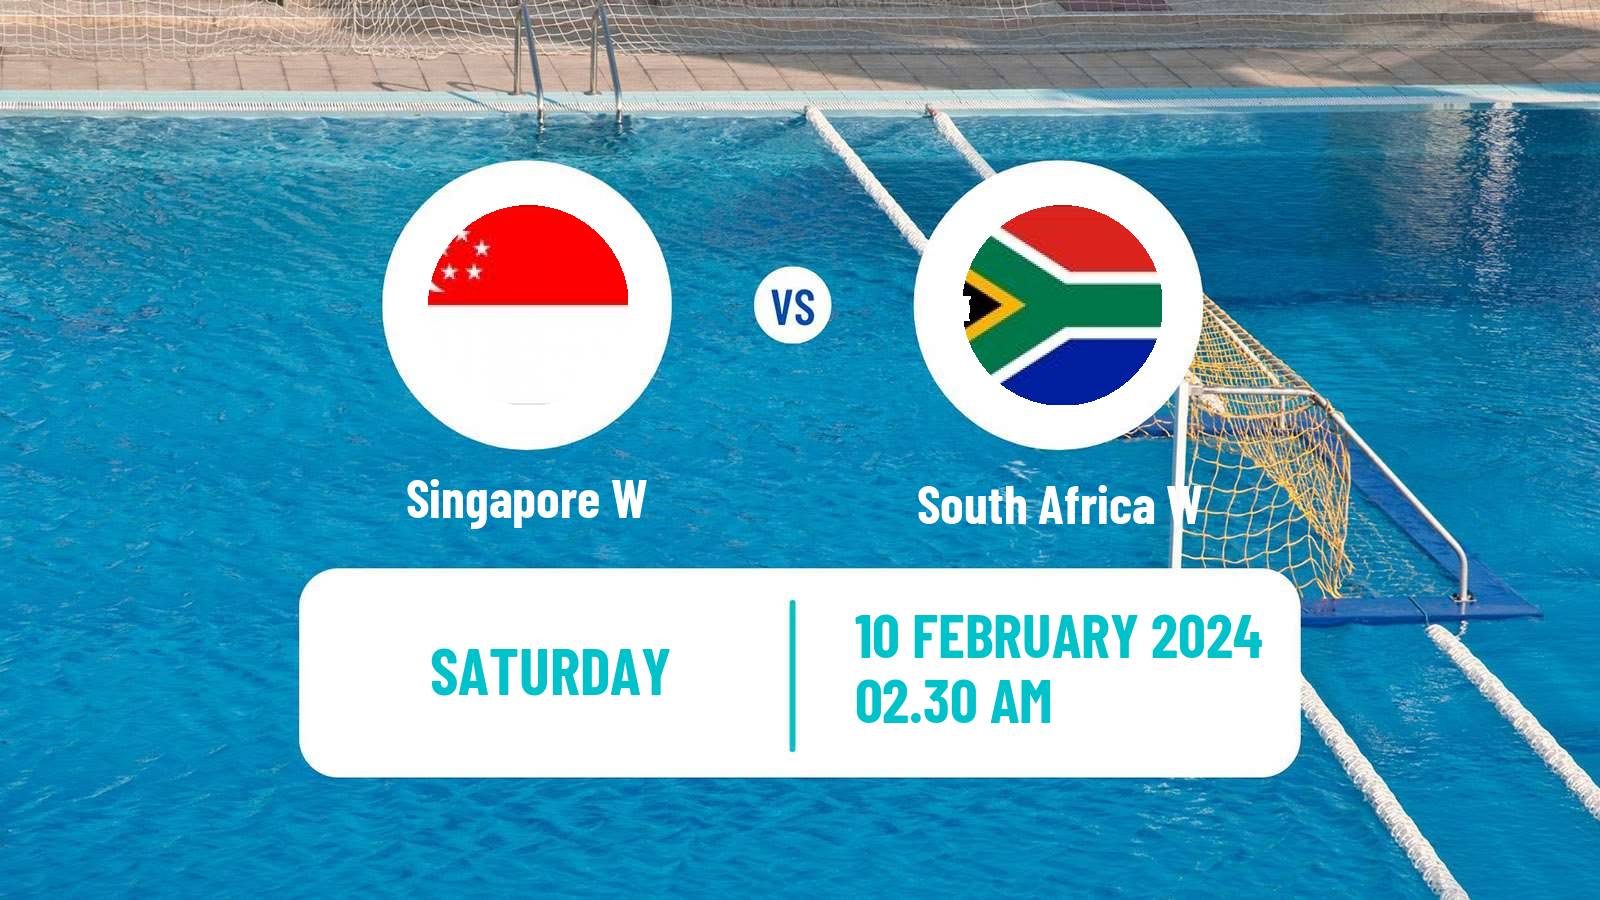 Water polo World Championship Water Polo Women Singapore W - South Africa W